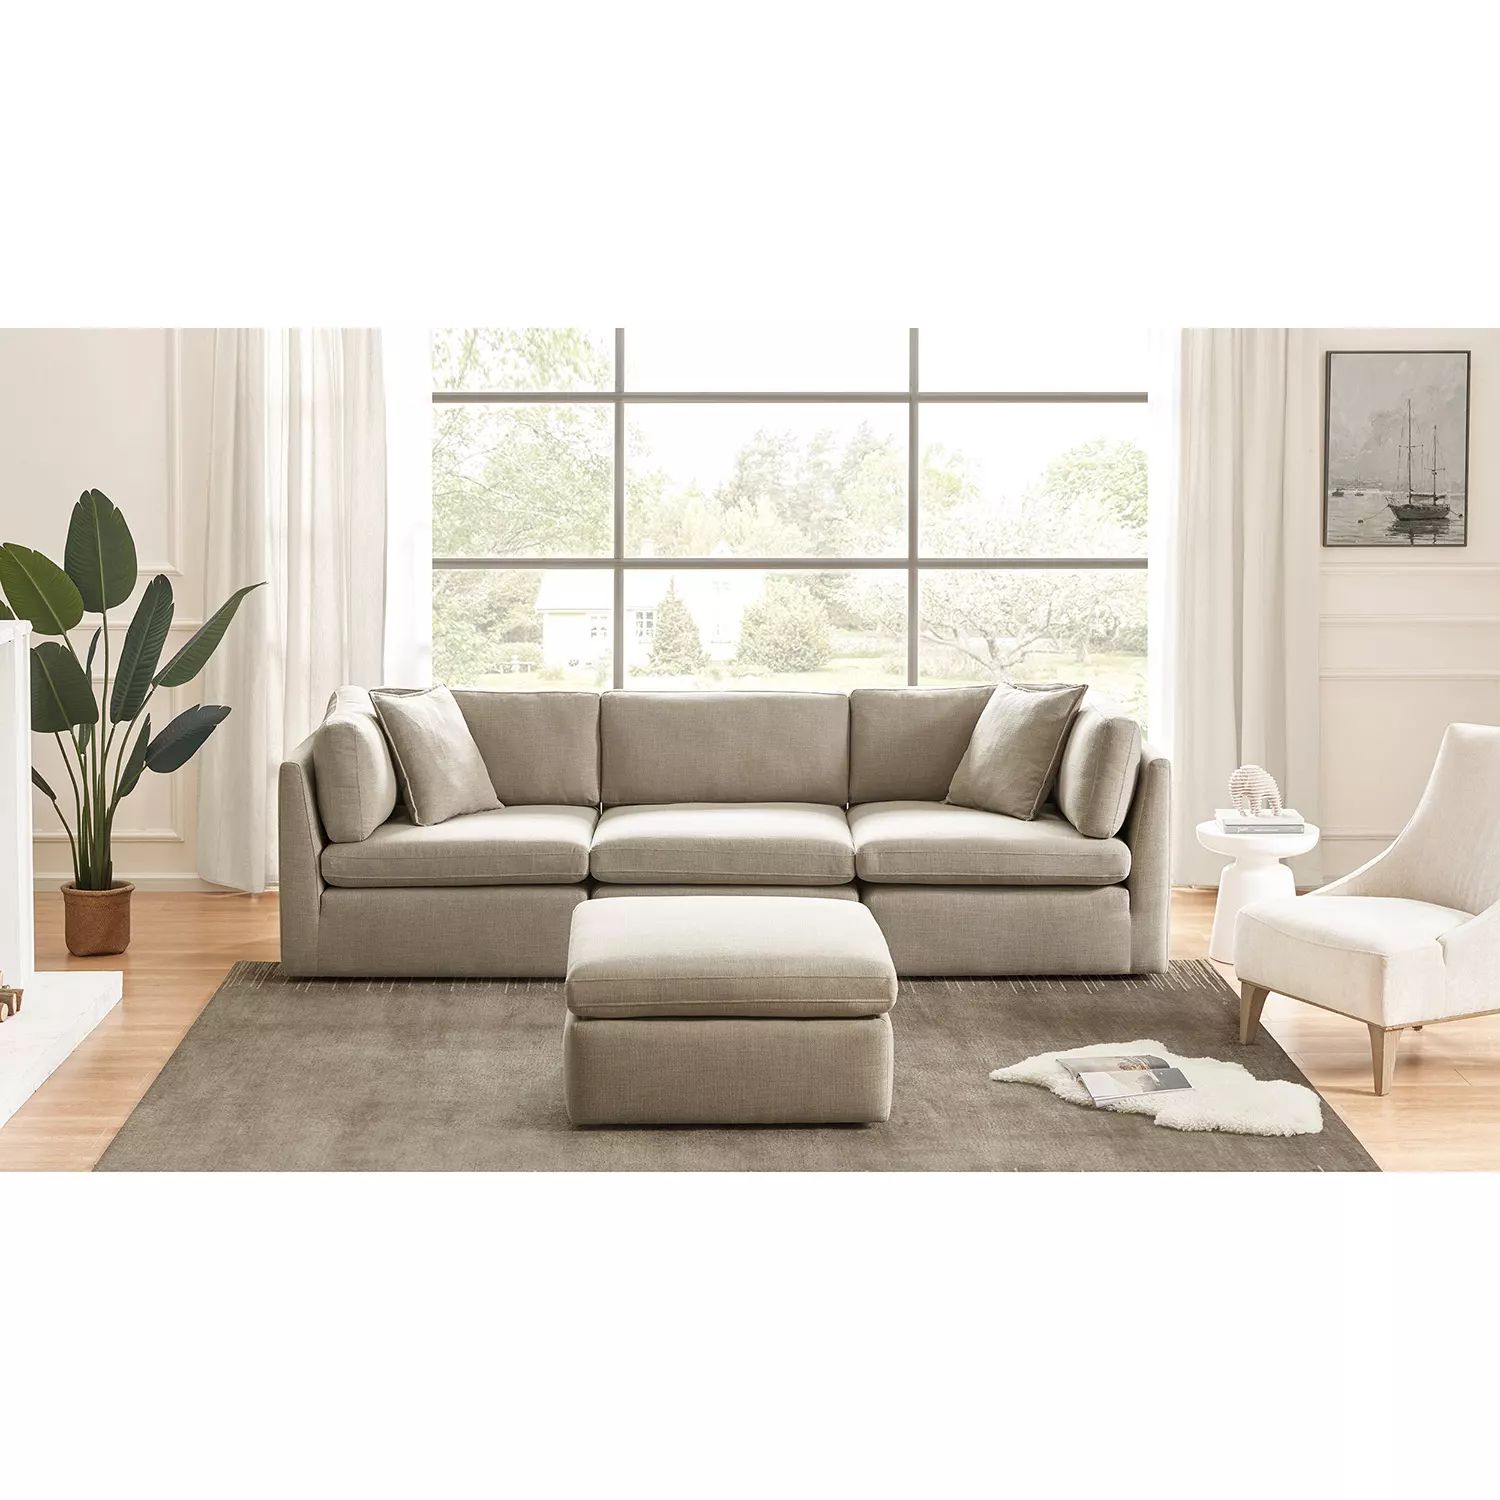 Cole & Rye Lounge Couch Modular Seating, Assorted Colors | Sam's Club